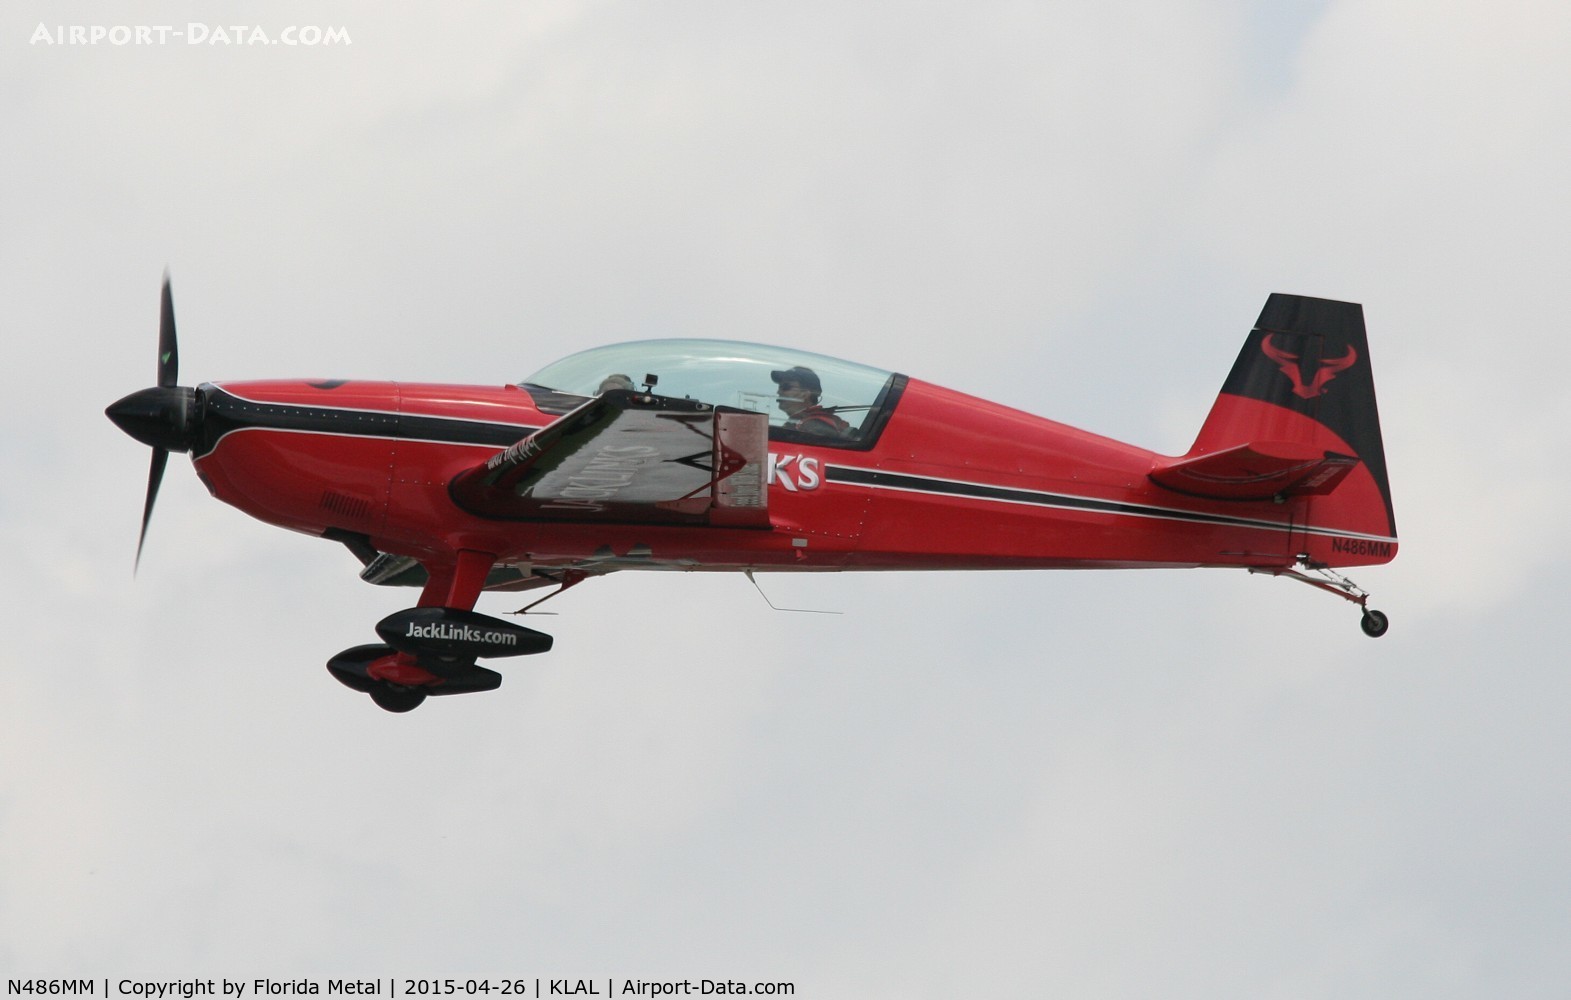 N486MM, 2001 Extra EA-300/L C/N 136, Extra 300 zx